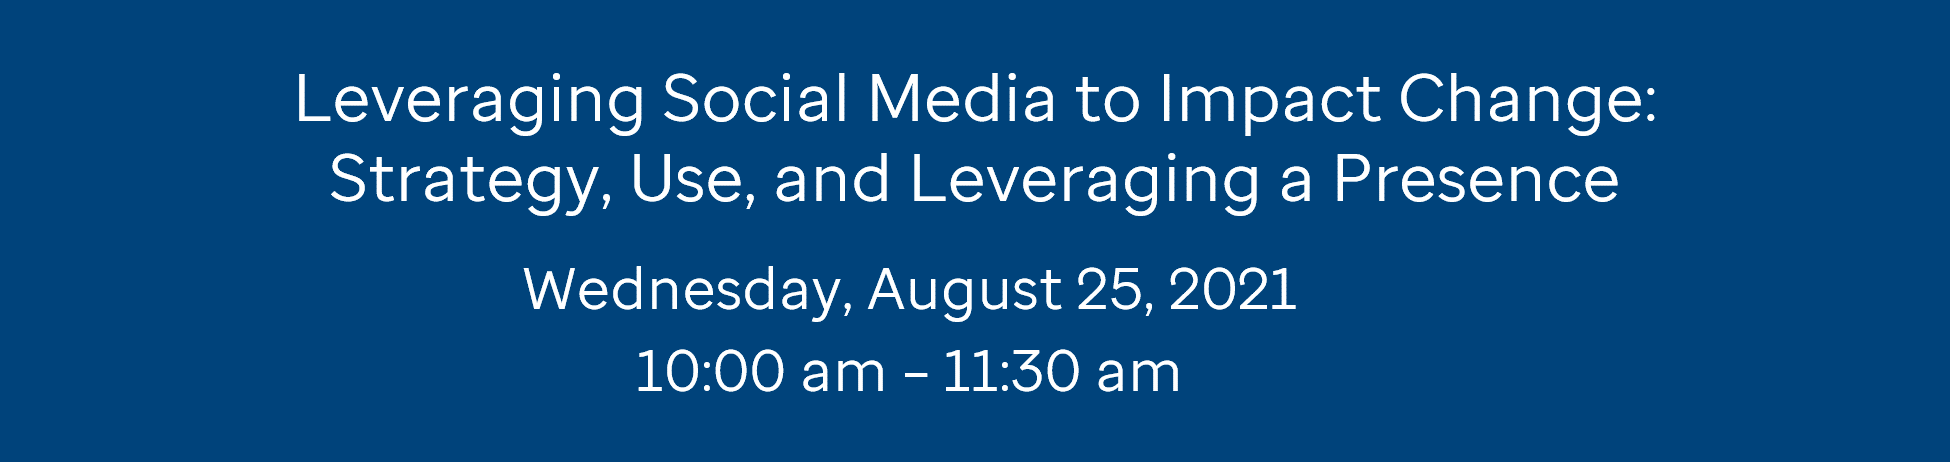 Leveraging Social Media to Impact Change: Strategy, Use, and Leveraging a Presence